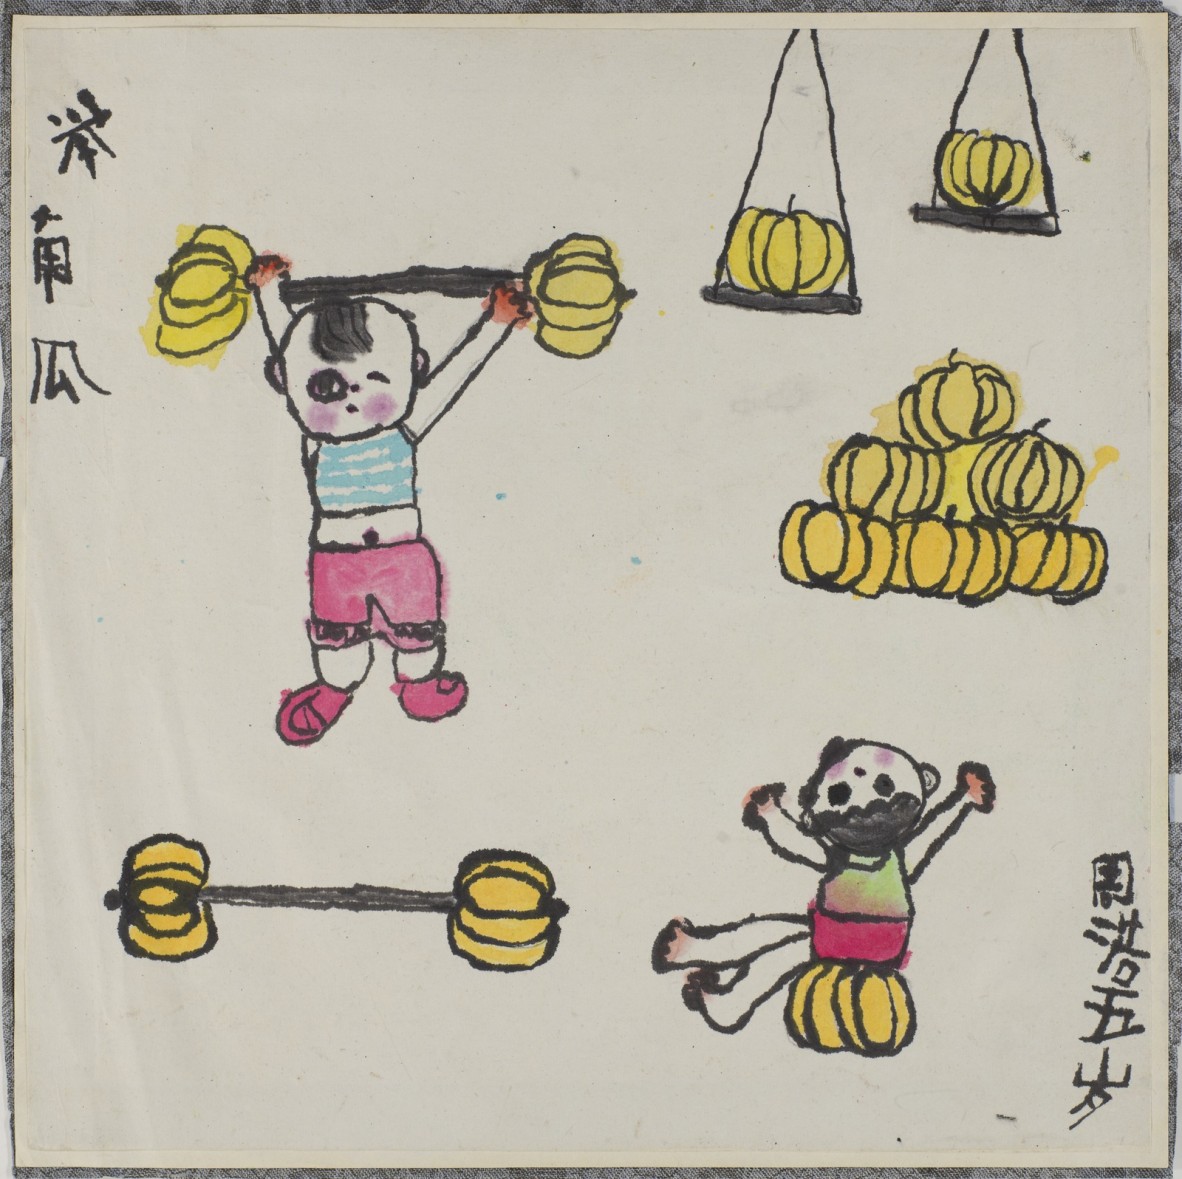 A children's brush drawing on pale paper: two children are pictured. One lifts pumpkins above their head like a barbell. The other sits on a pumpkin and waves their arms.